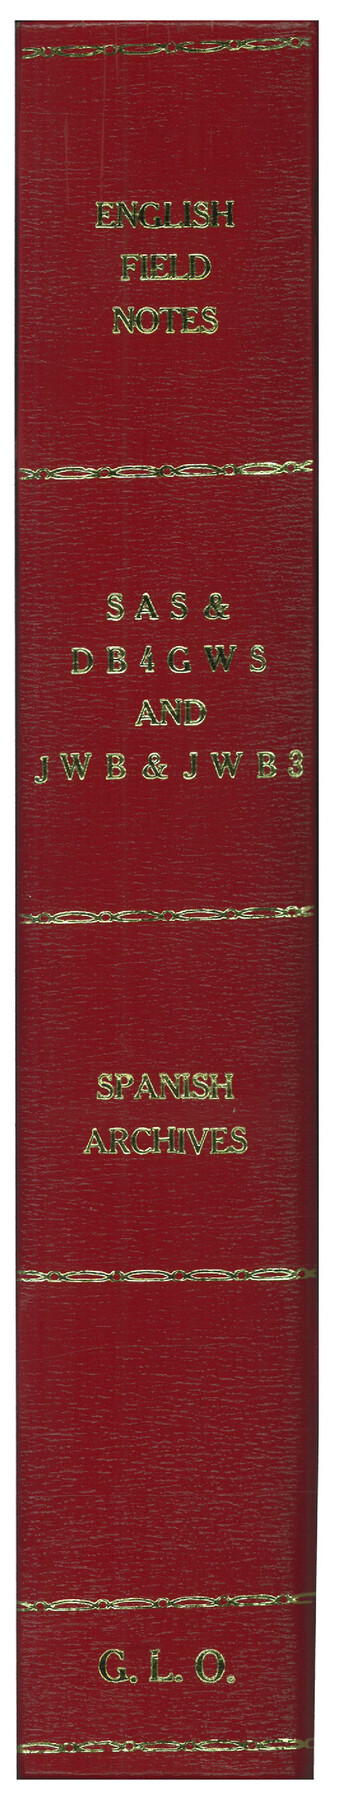 96551, English Field Notes of the Spanish Archives - Books SAS, DB4, GWS, JWB, and JWB3, Historical Volumes